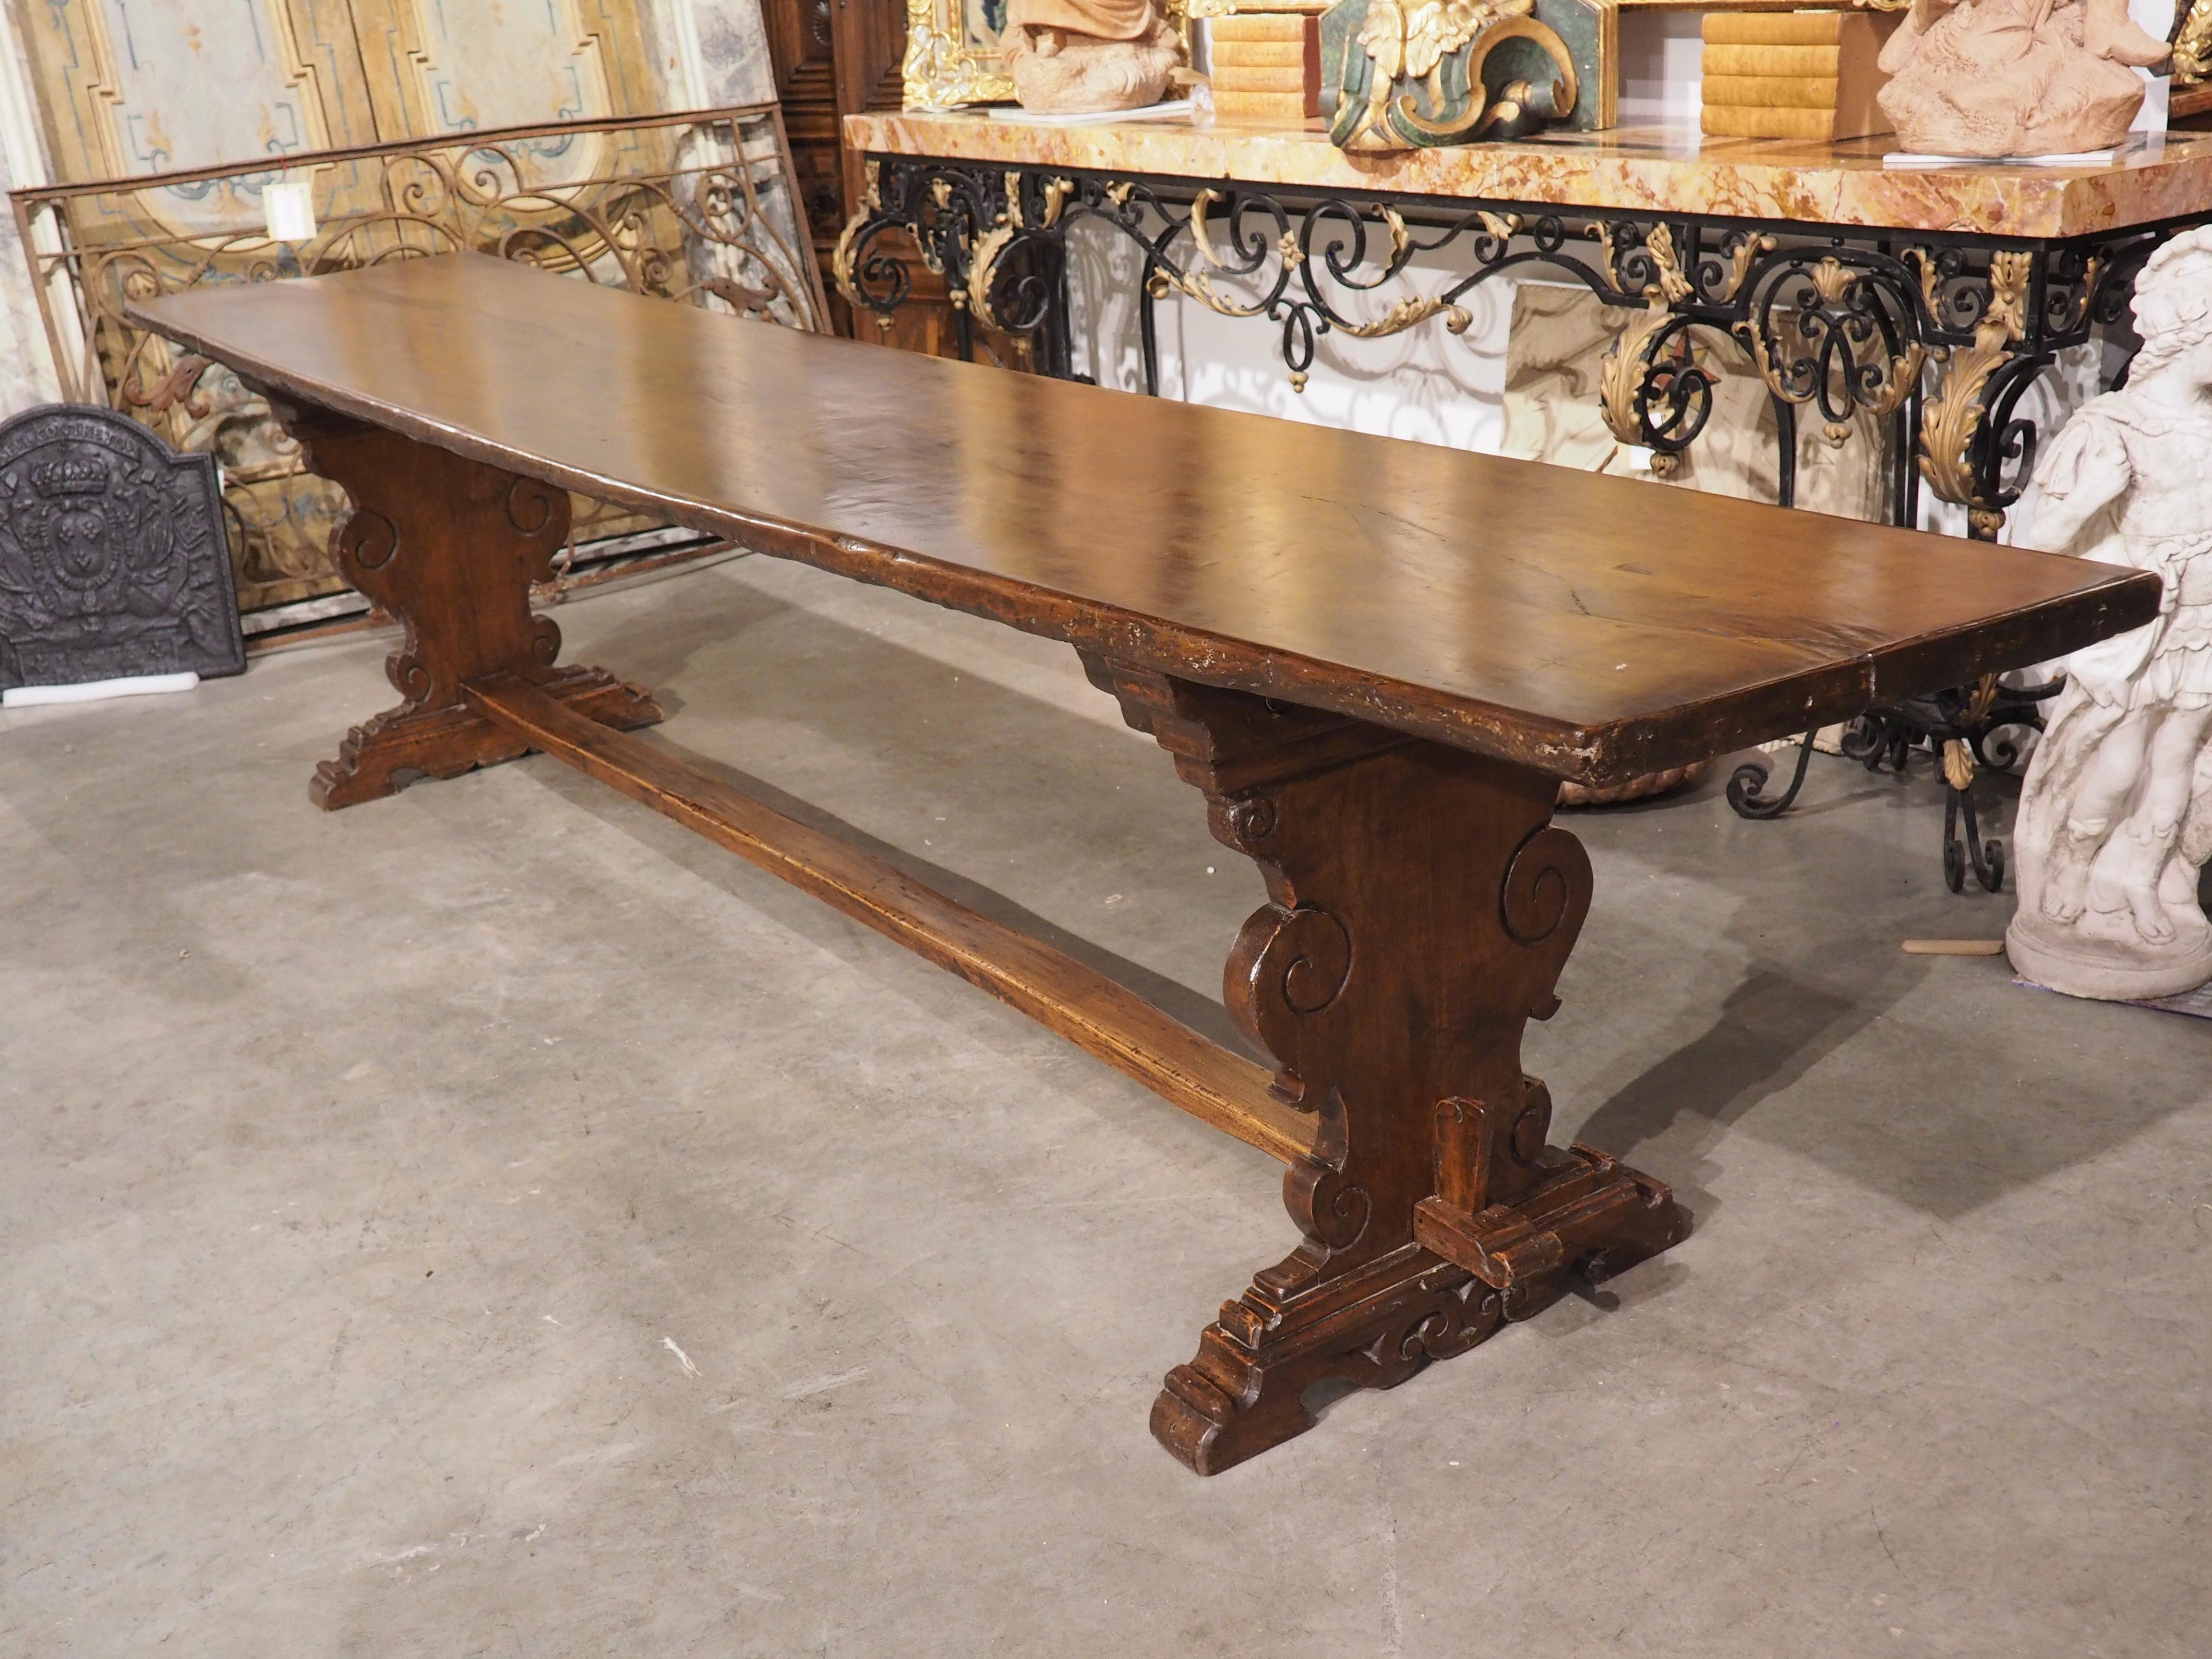 A rare single plank of walnut with extreme length (11 feet, 6 inches) forms the top for the refectory table from Northern Italy. Tables such as this were often used as dining tables for monks at monasteries. This beautiful example from Tuscany,